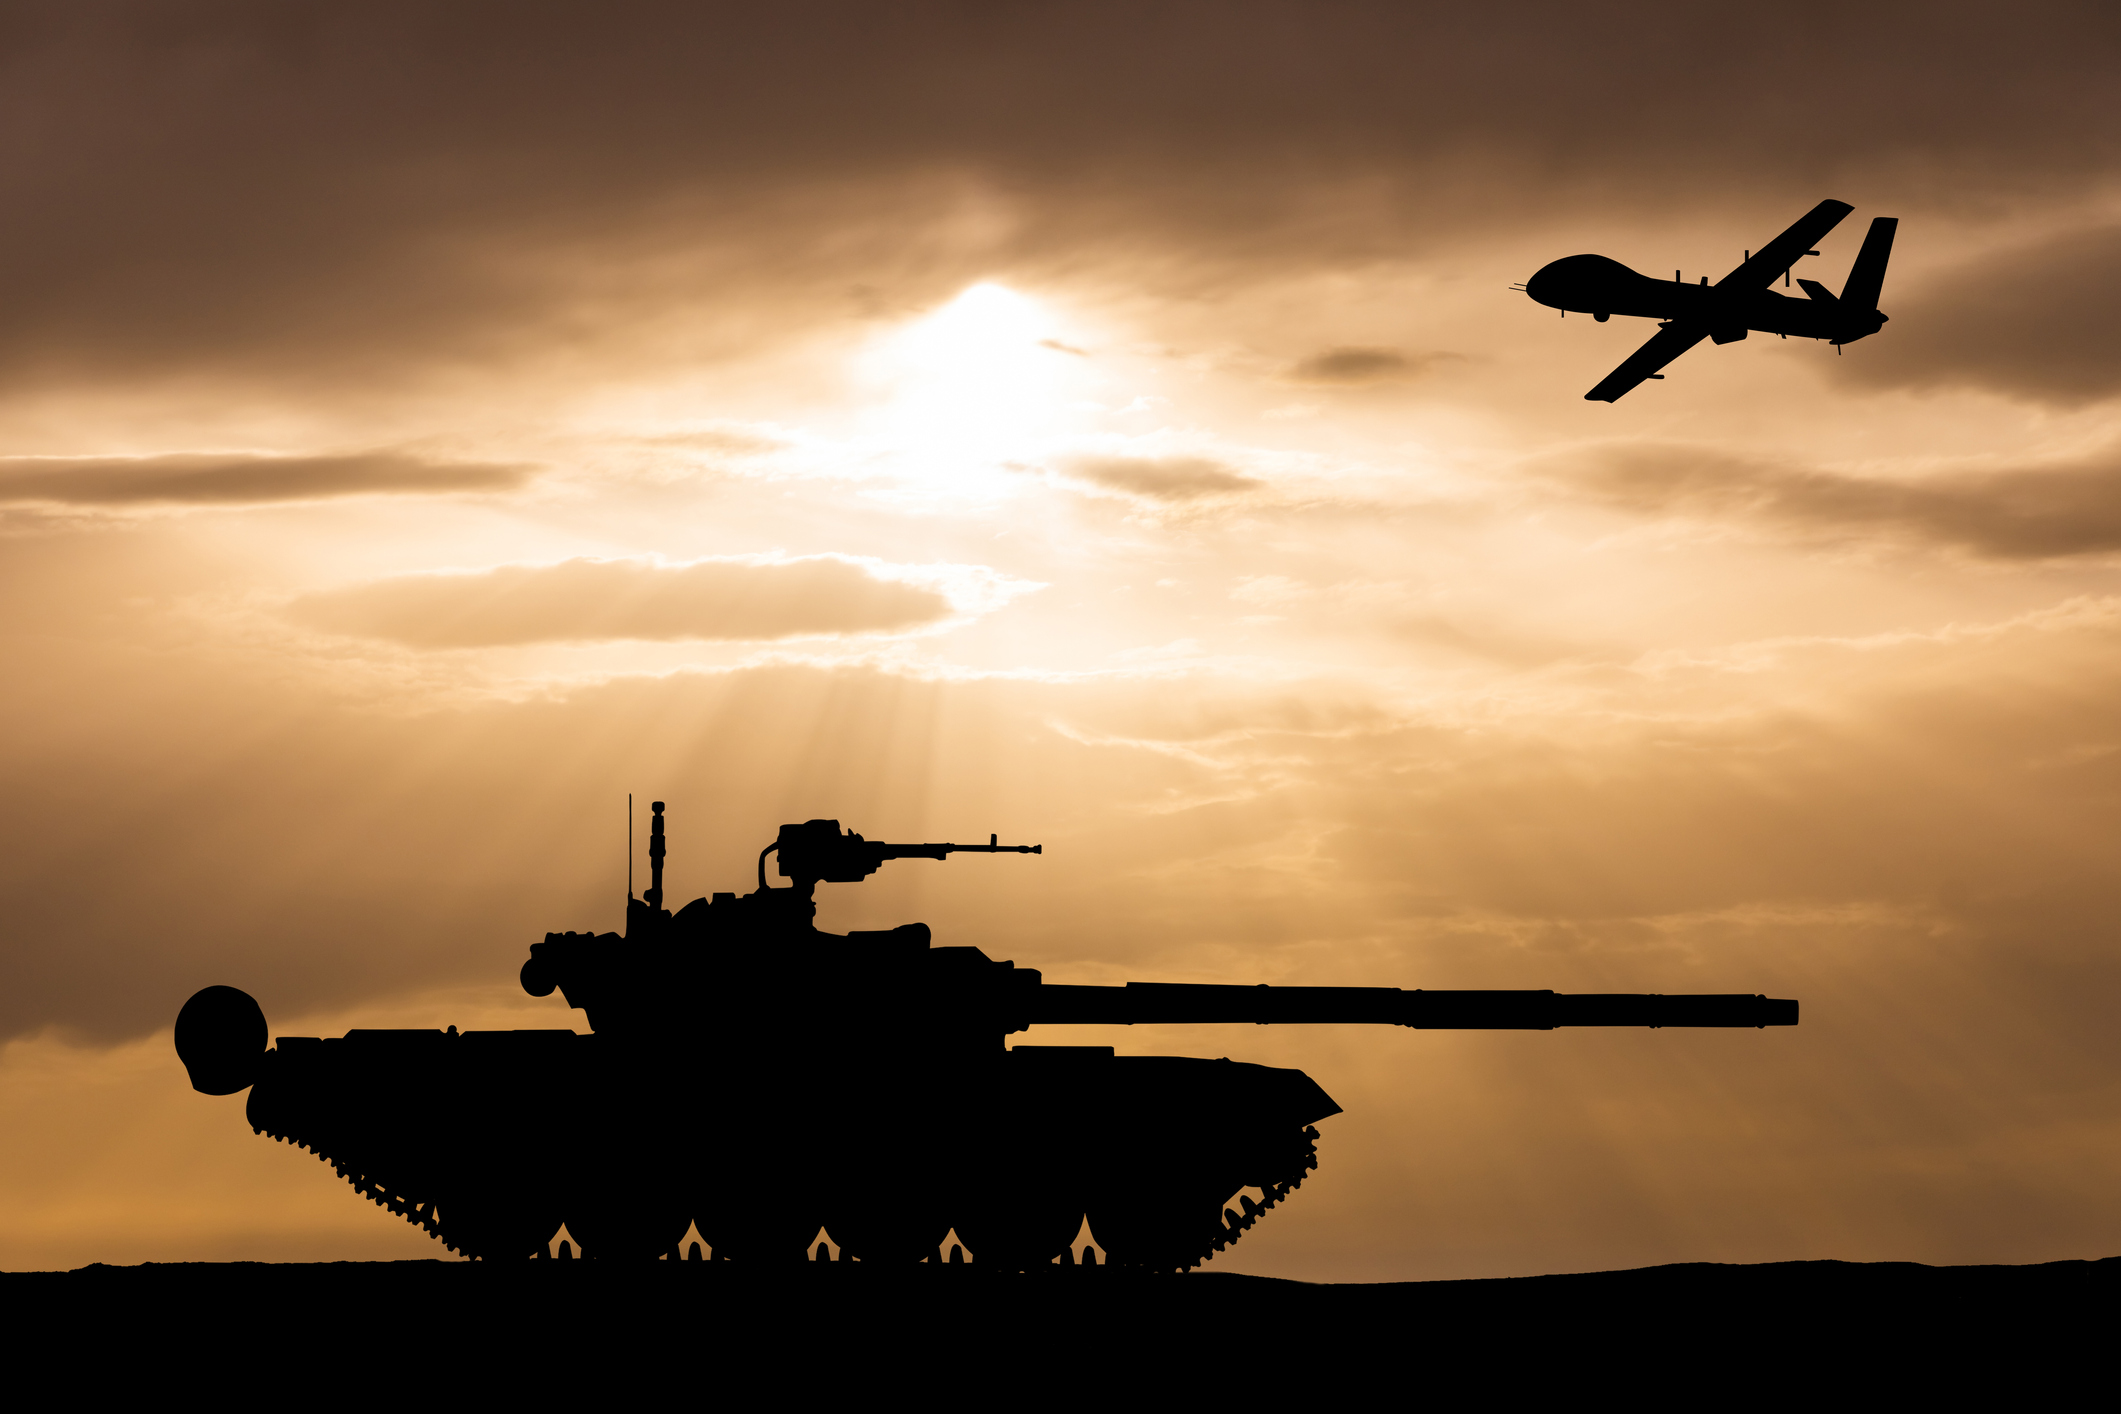 Armored tank and combat drone on the background of the sunset sky